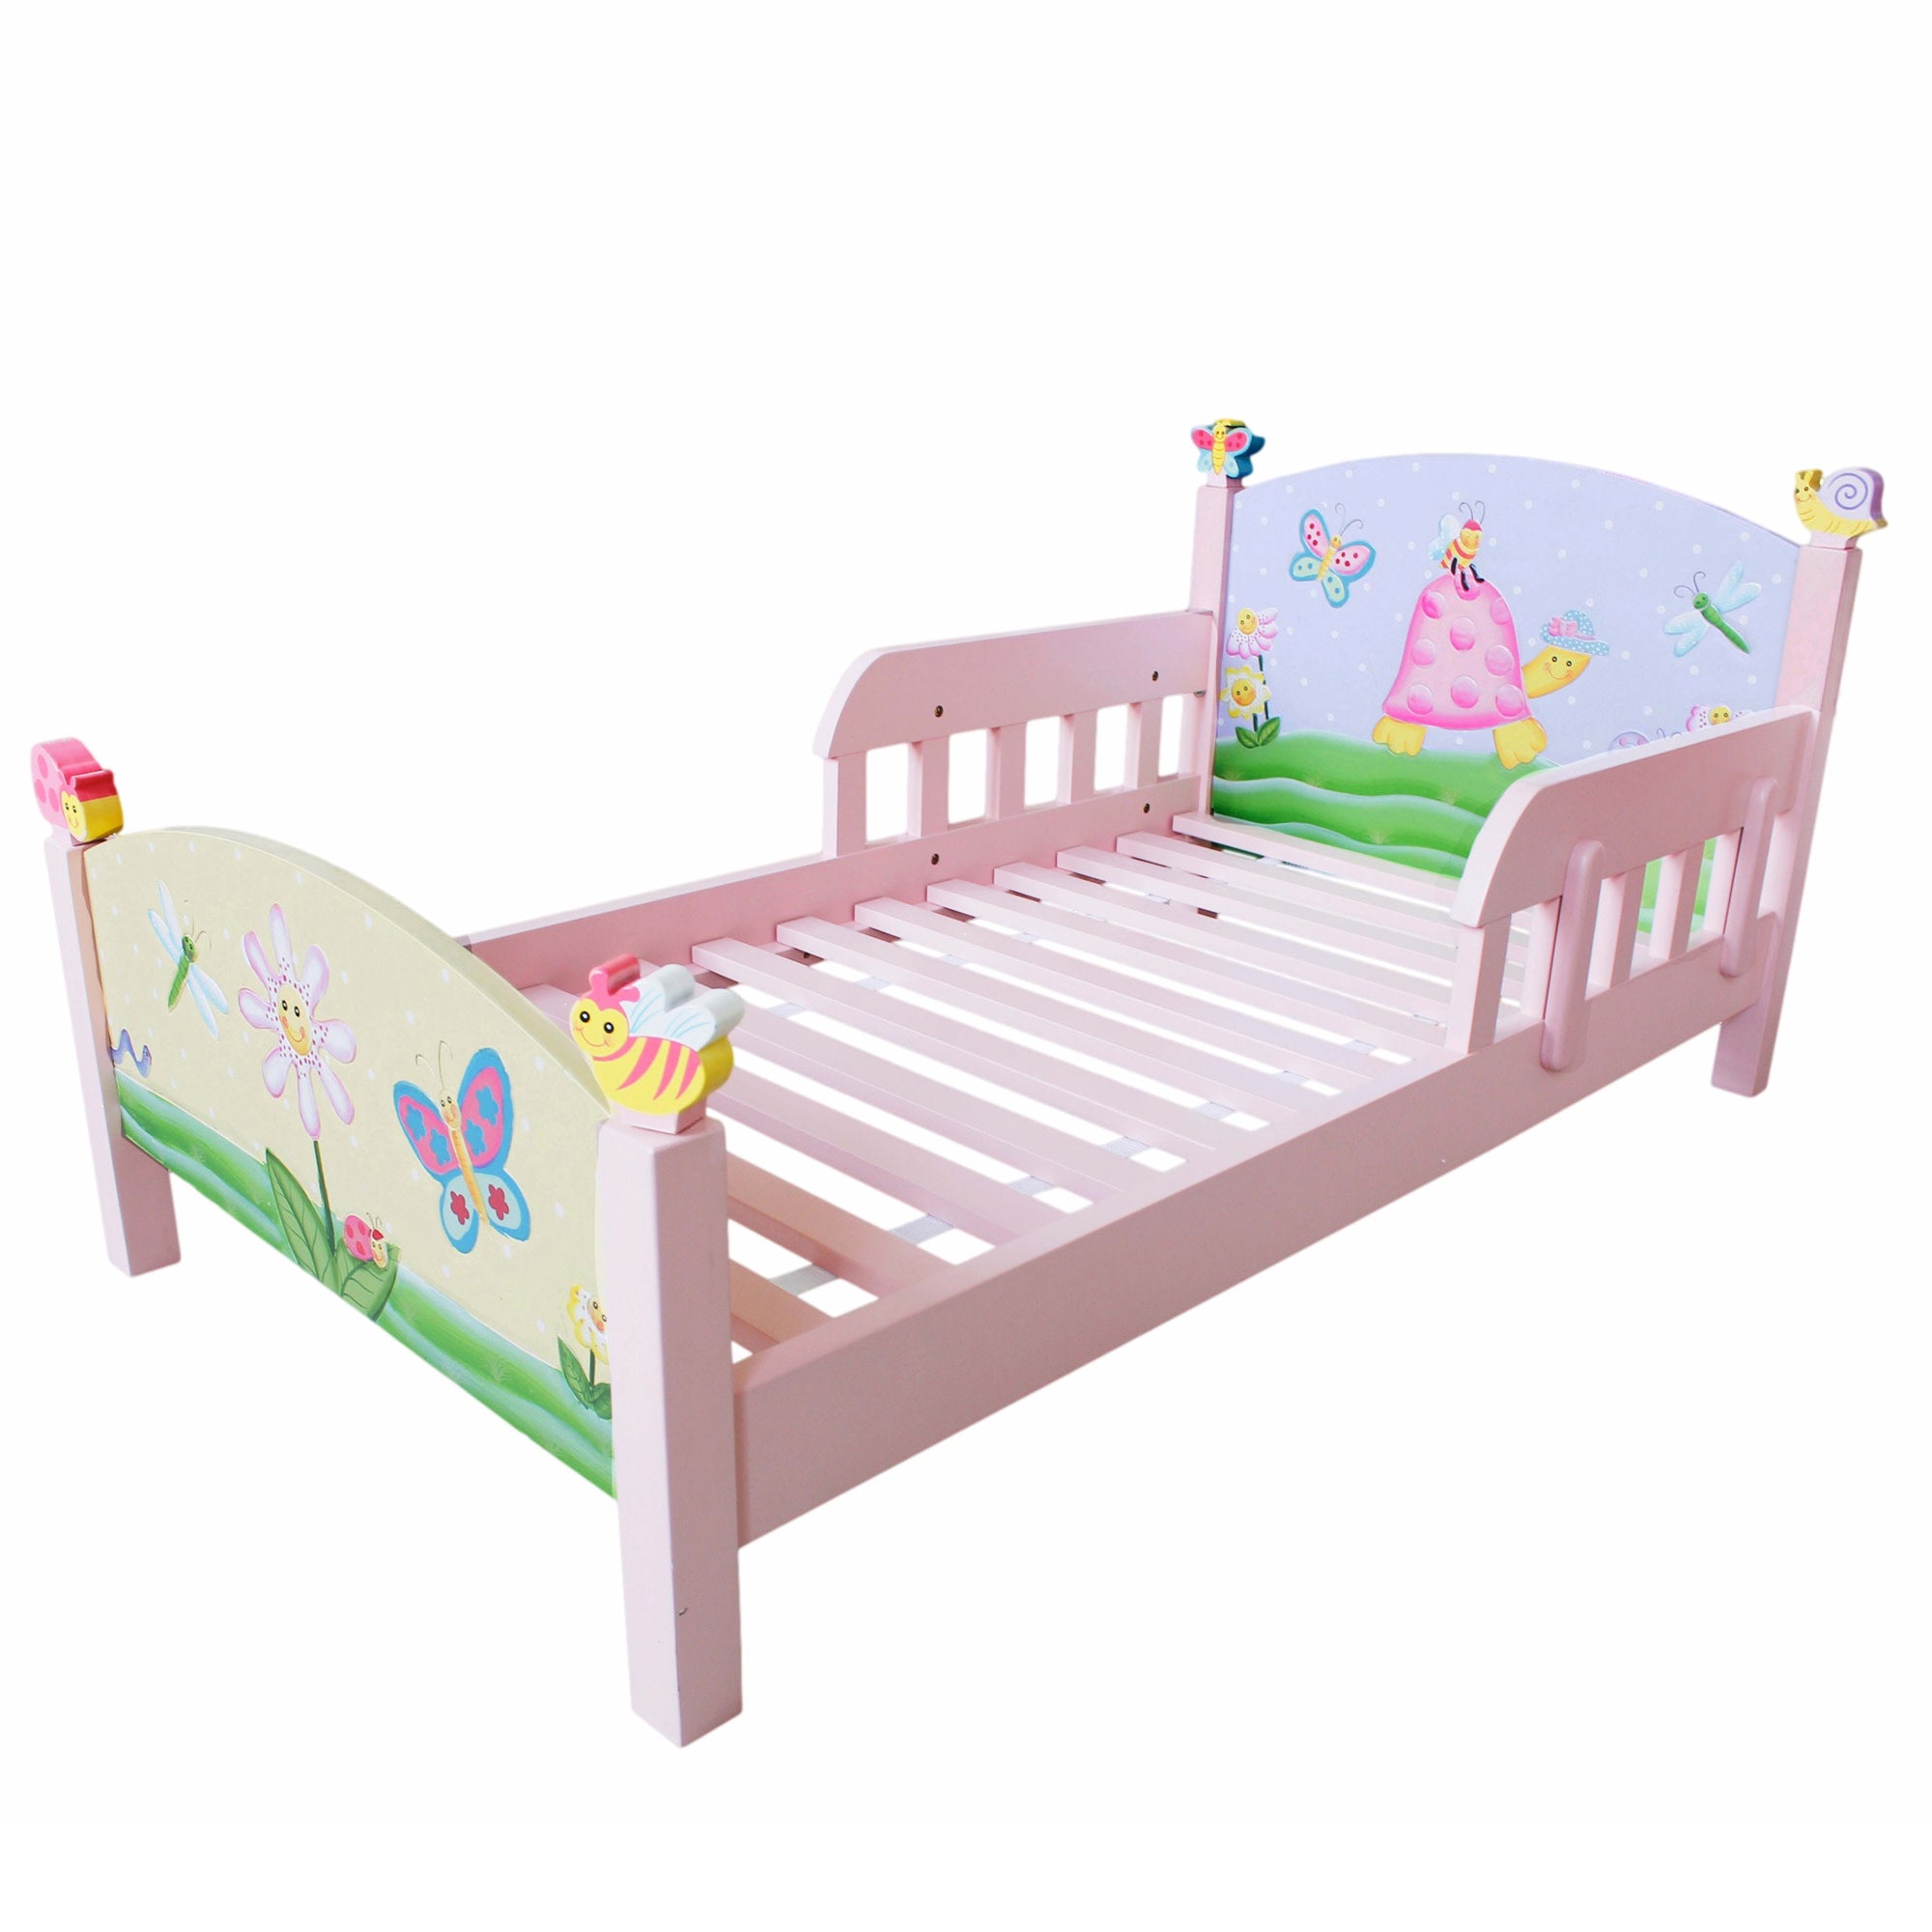 Fantasy Fields Toy Furniture Magic Garden Toddler Bed with Hand-Painted Murals & Hand-Carved Smiling Bug Friend Accents, Pink/Green